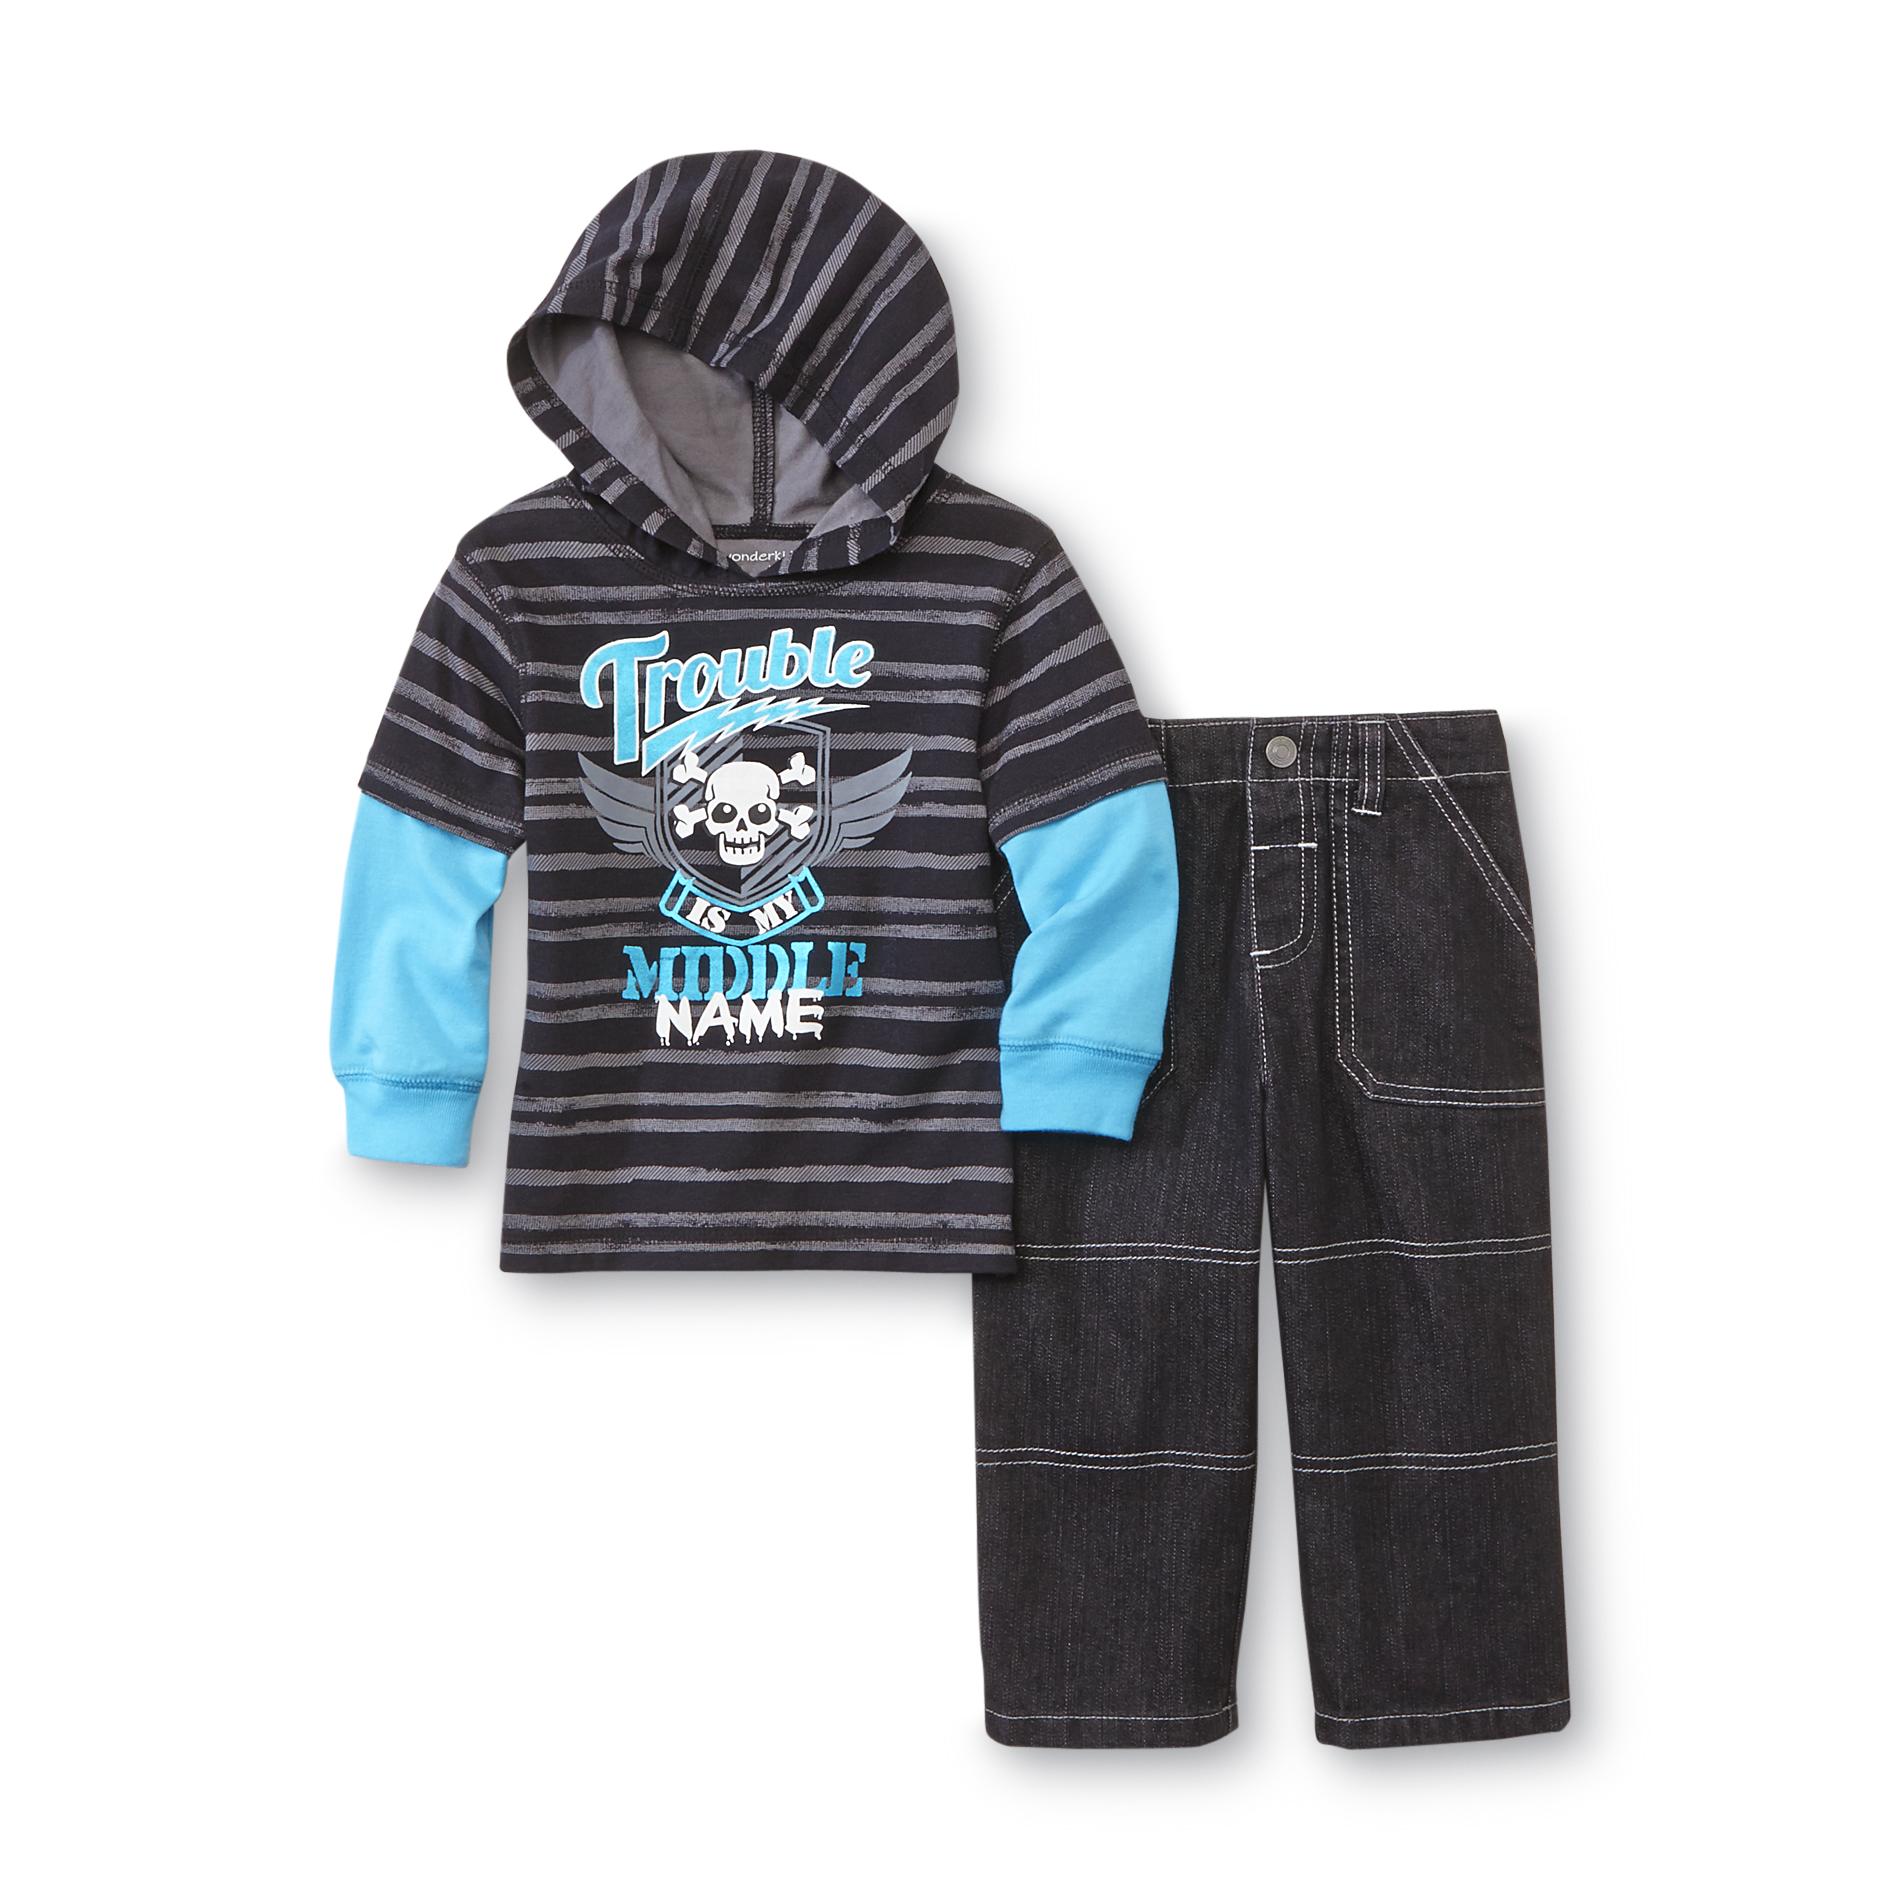 WonderKids Infant & Toddler Boy's Layered Look Hoodie & Jeans - Trouble